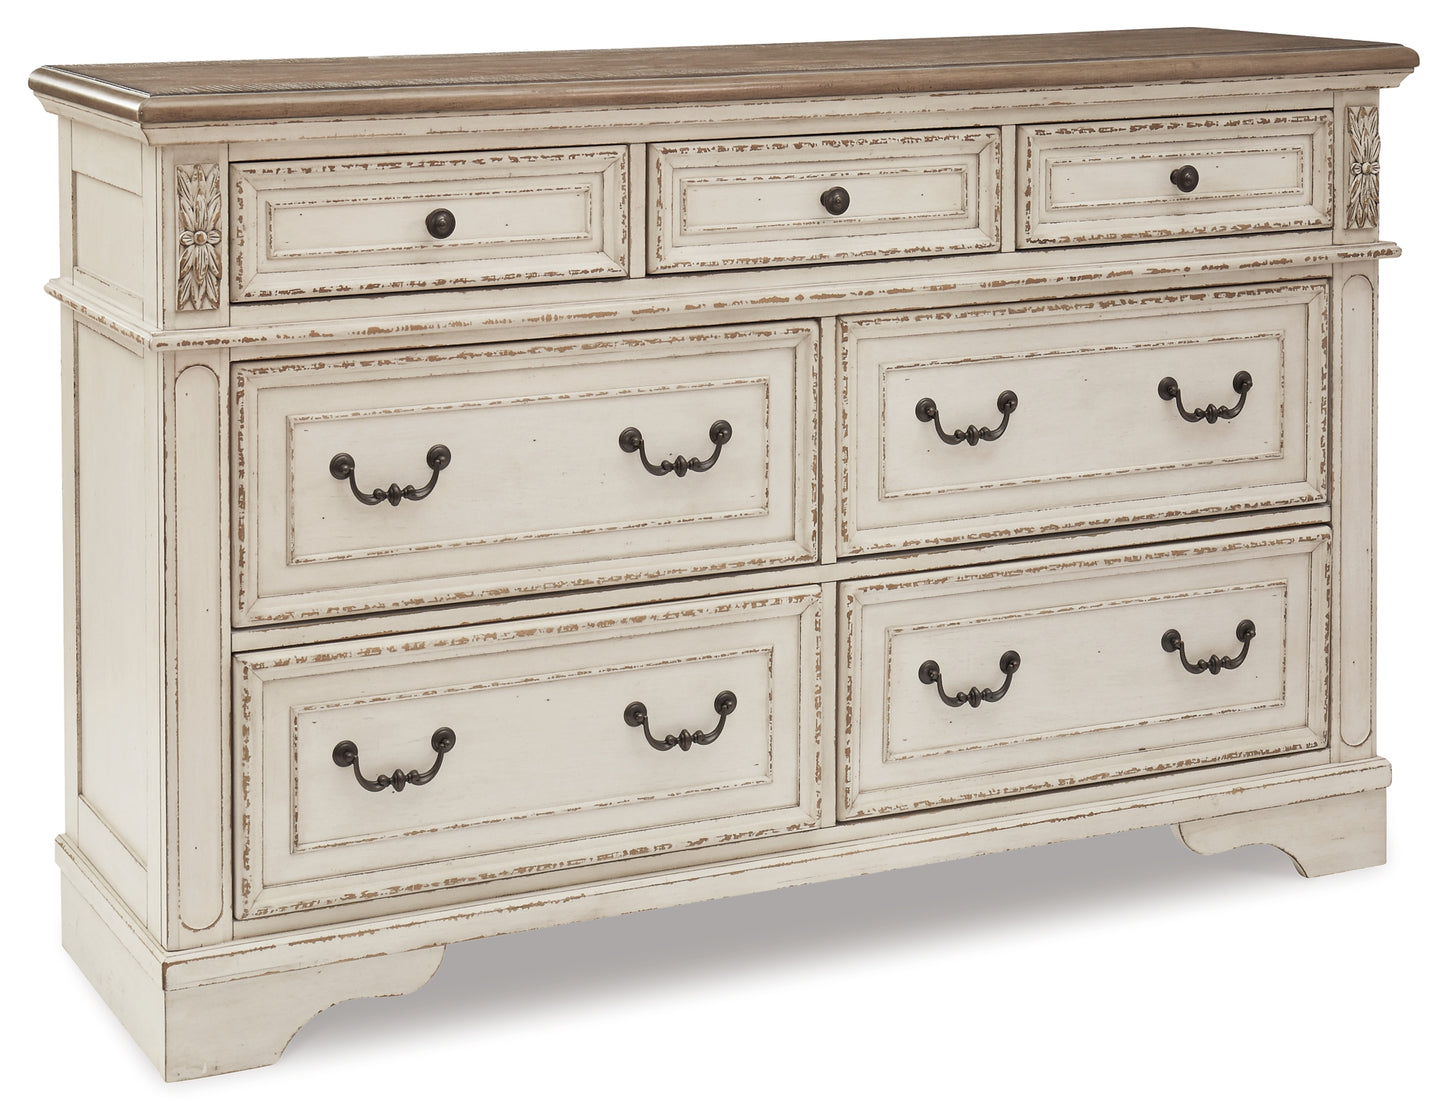 Realyn California King Upholstered Panel Bed with Dresser Signature Design by Ashley®